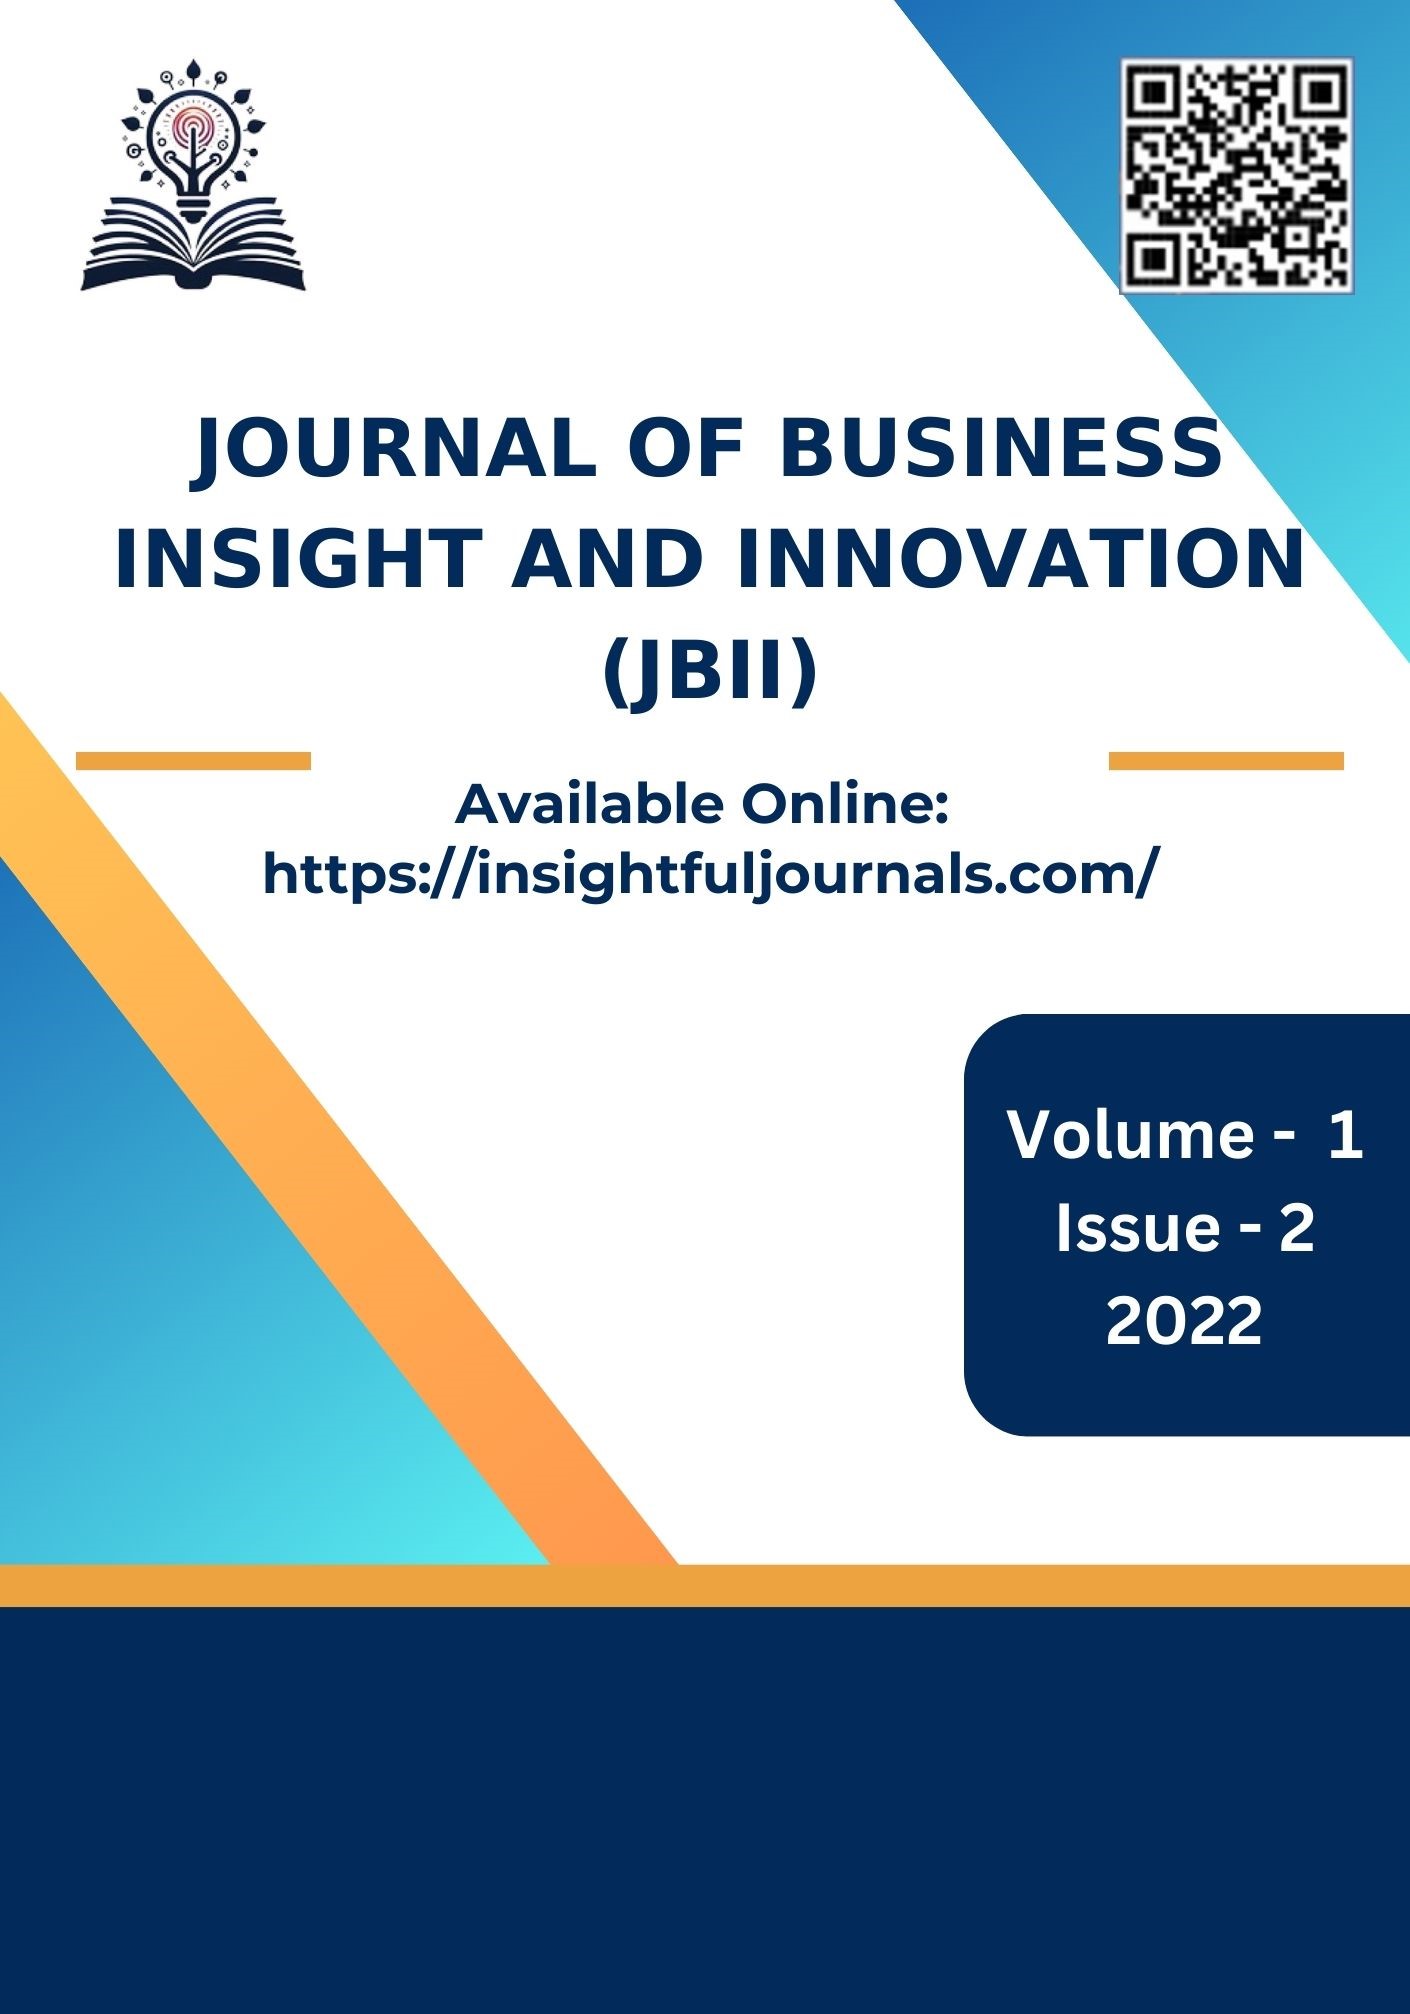 					View Vol. 1 No. 2 (2022): Journal of Business Insight and Innovation
				